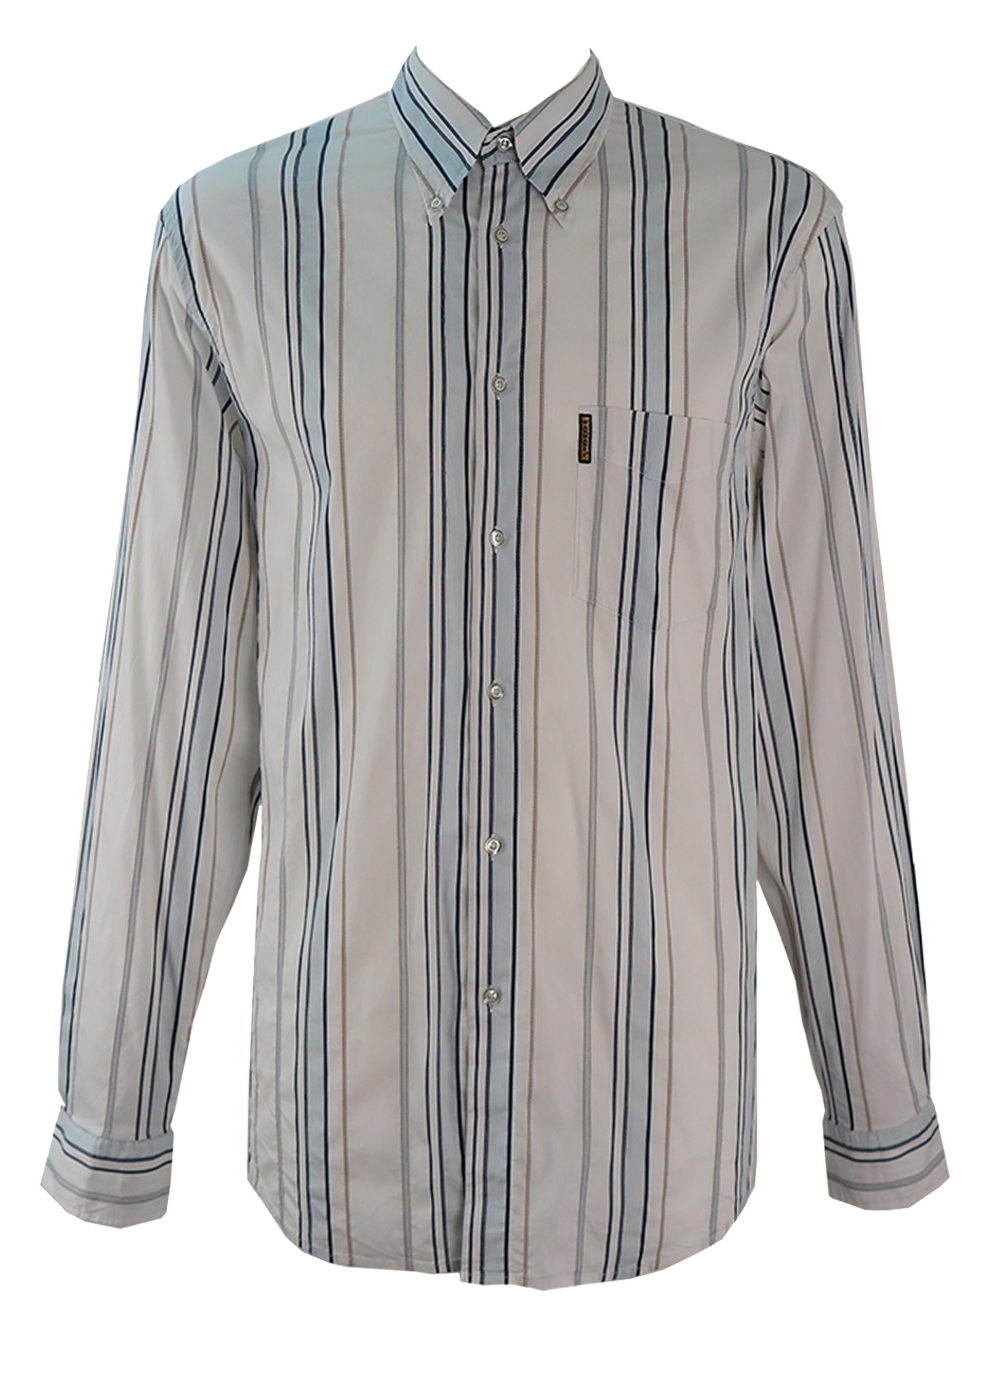 Armani Jeans White Shirt with Blue and Tan Textured Stripes - XL/XXL ...